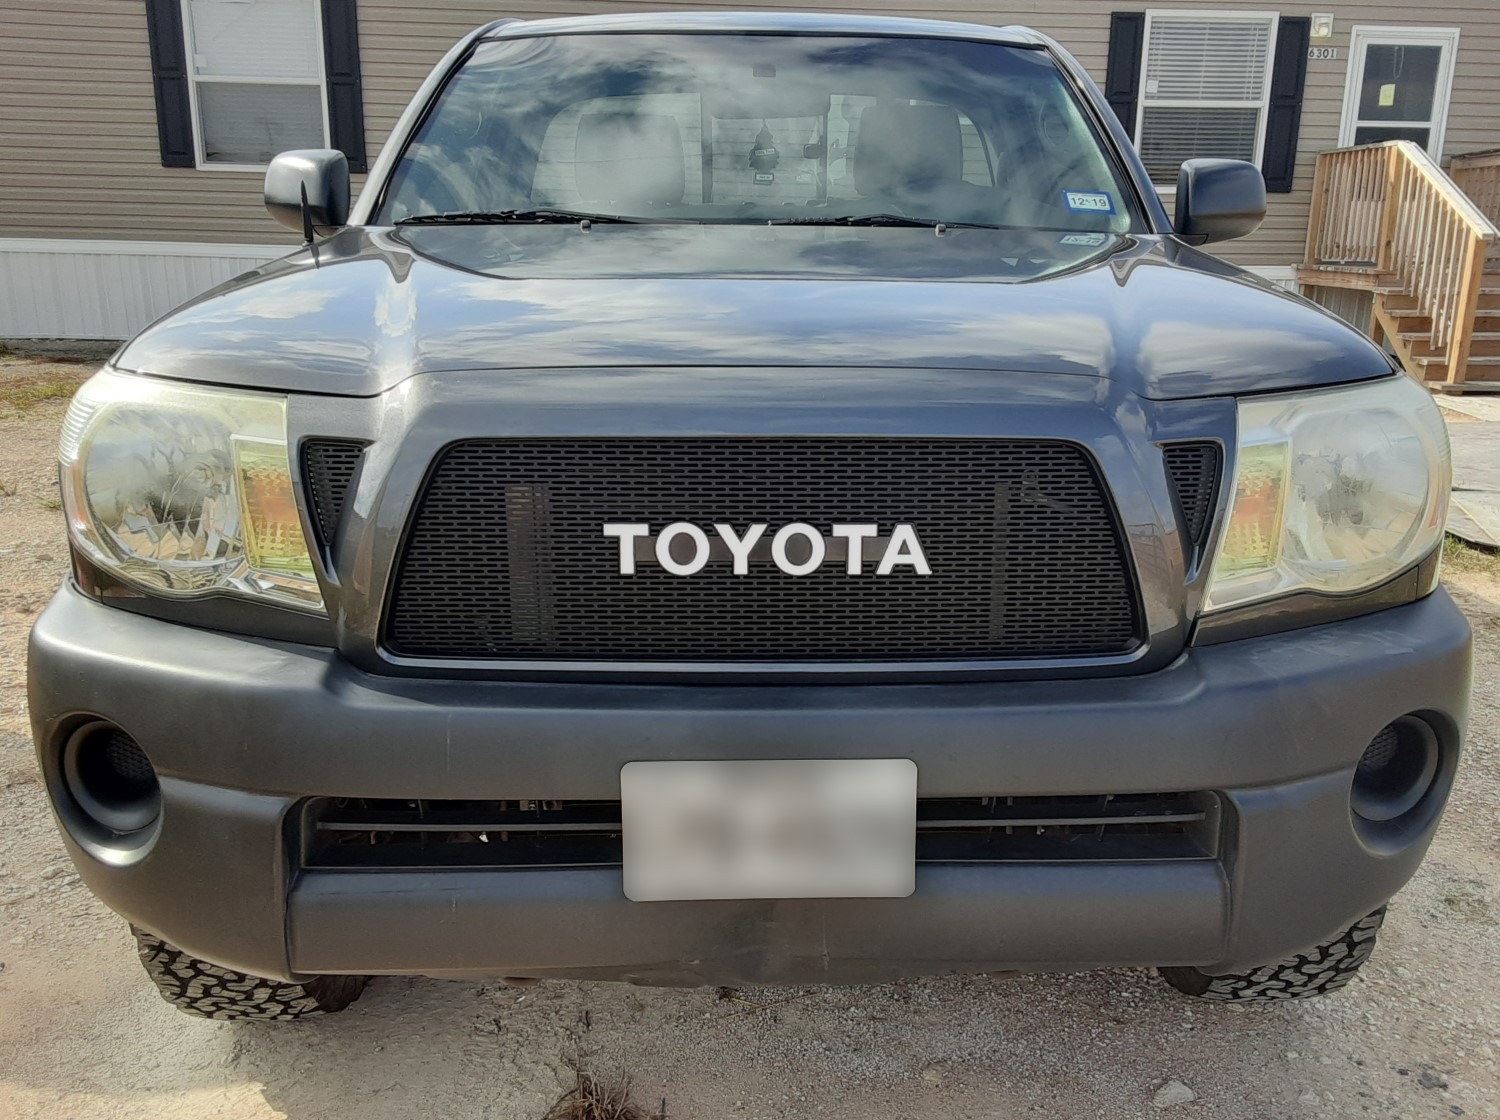 Tacoma Grille Customization: Flat Black Perforated Mesh with White Emblem